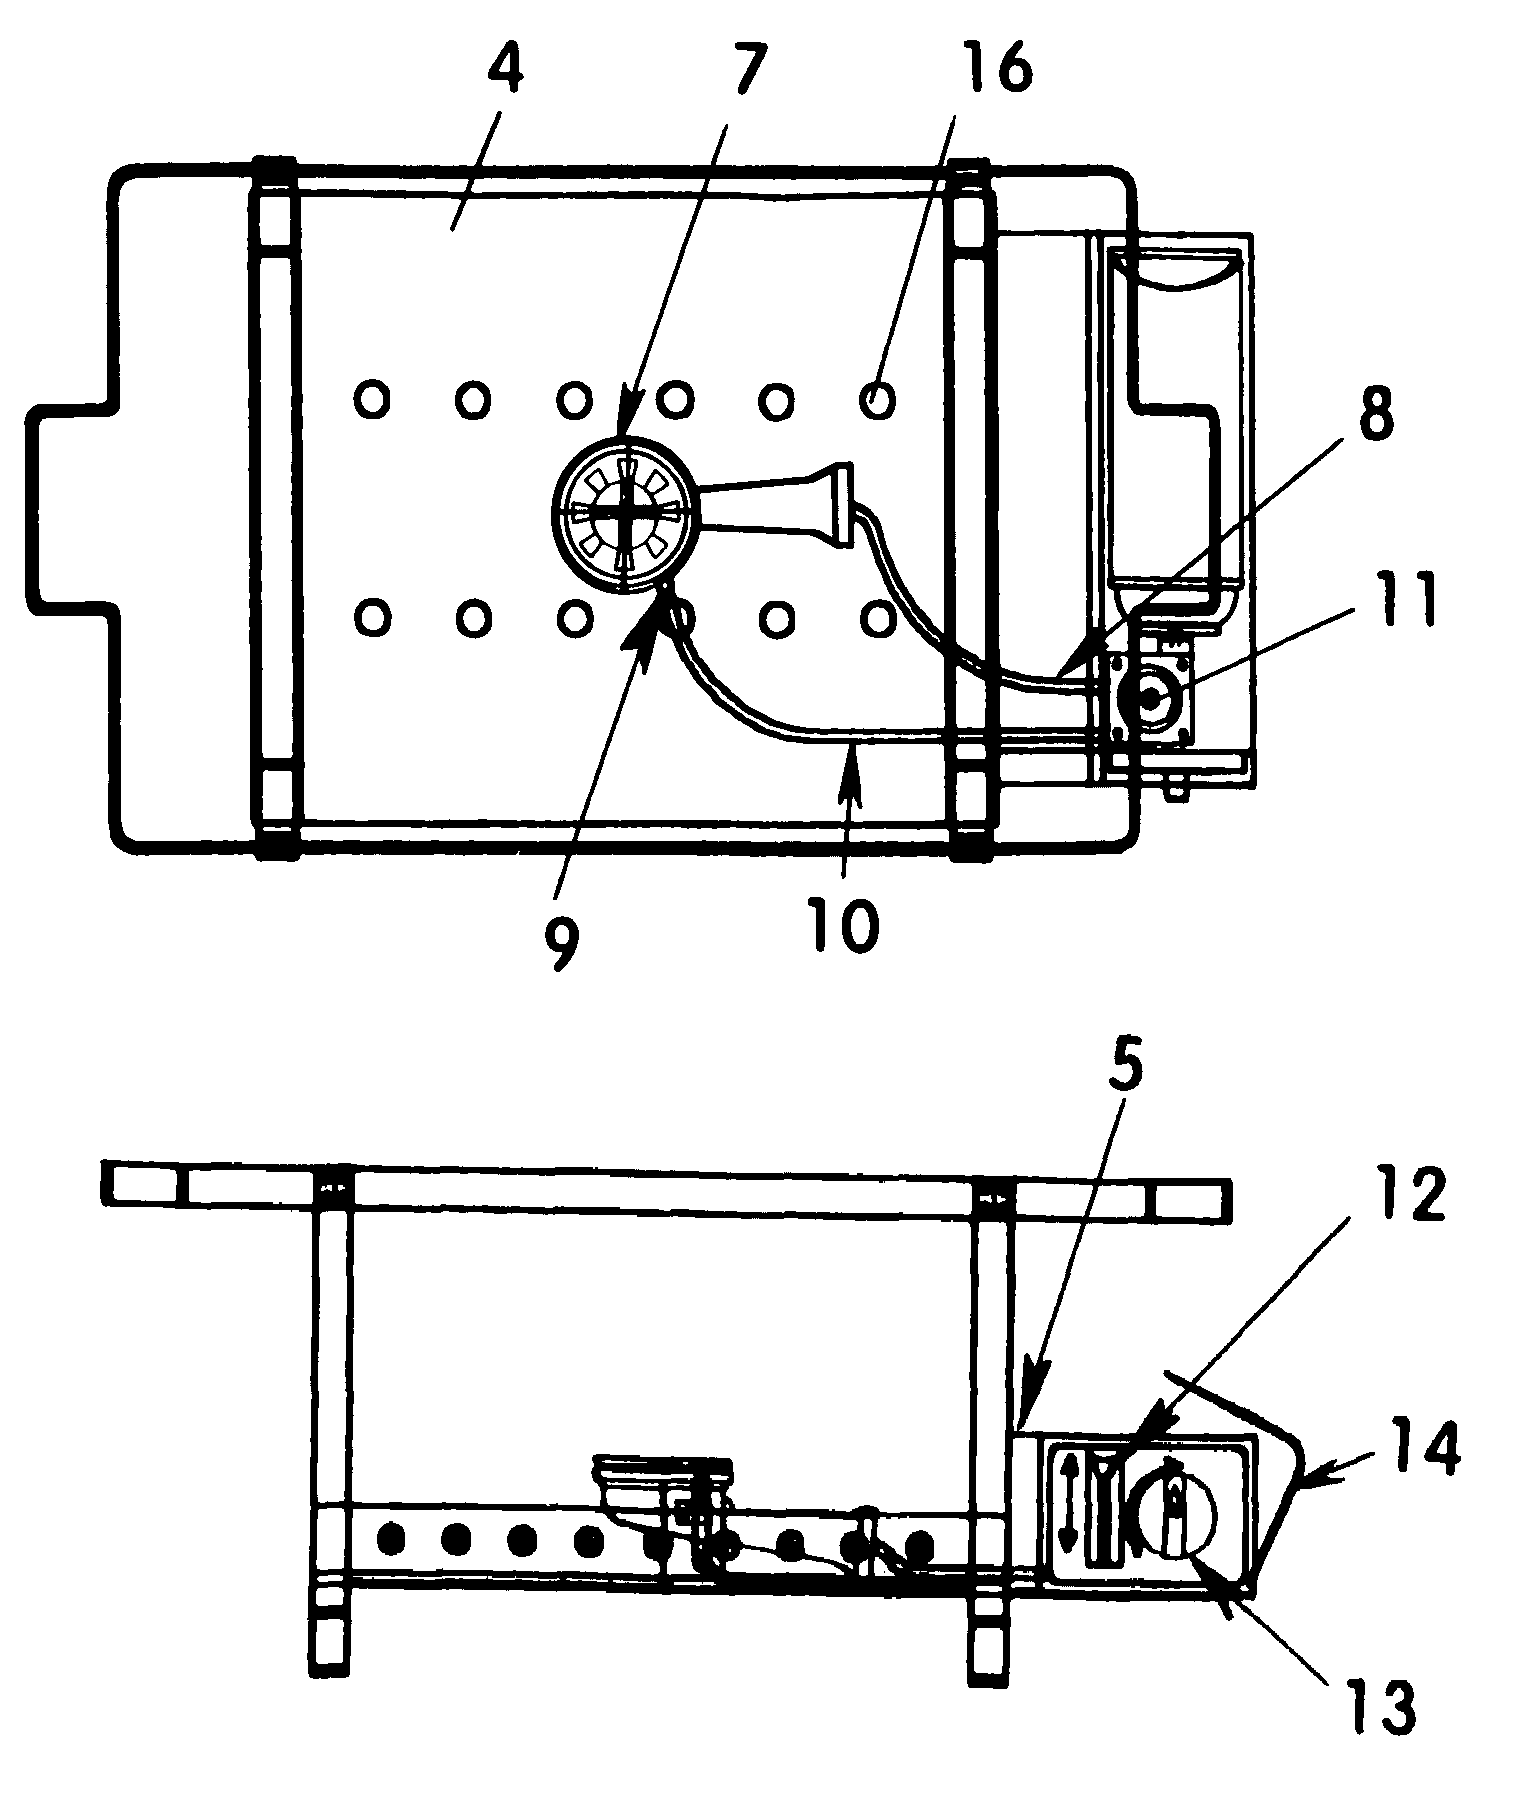 Machine for heating catered food items utilizing a butane gas heat source with burner control mechanism ("temperature controlled butane chafing dish")